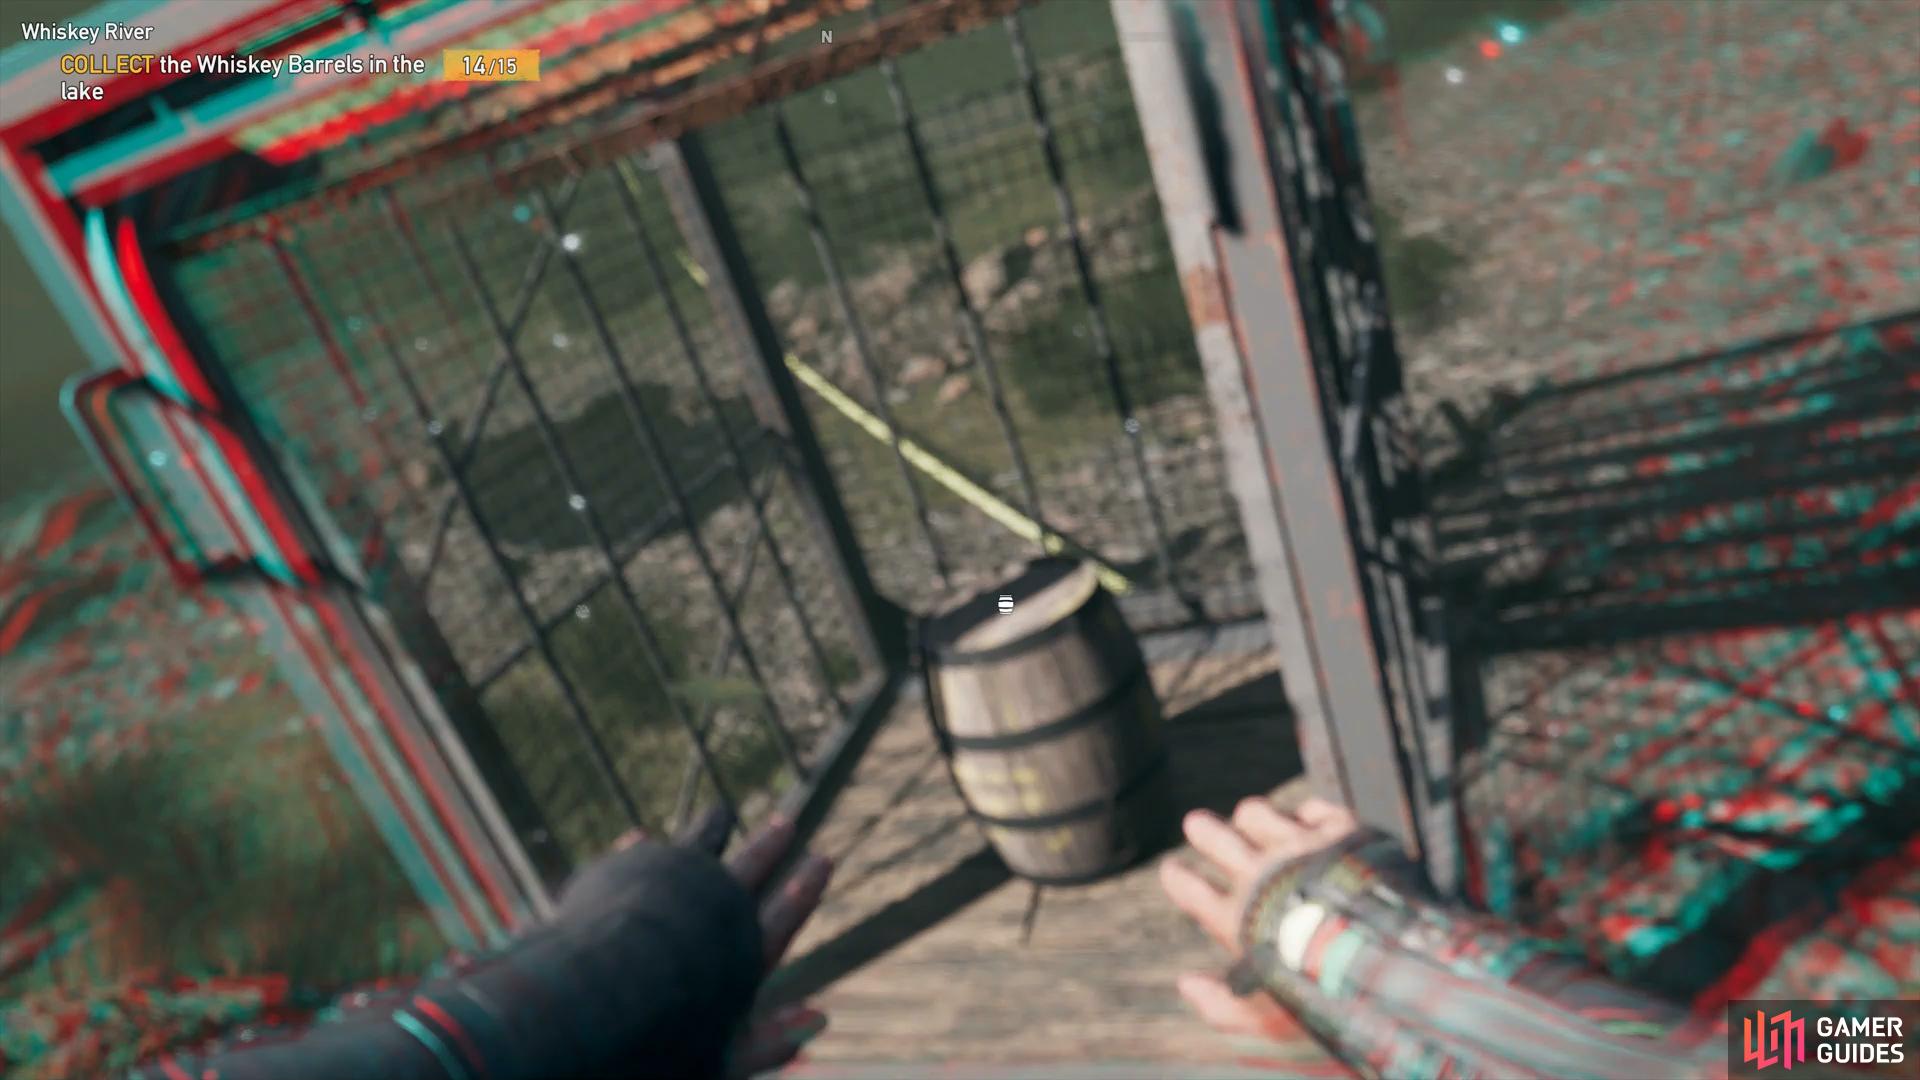 stand on the nearby rocks to shoot the cage open and collect the barrel.